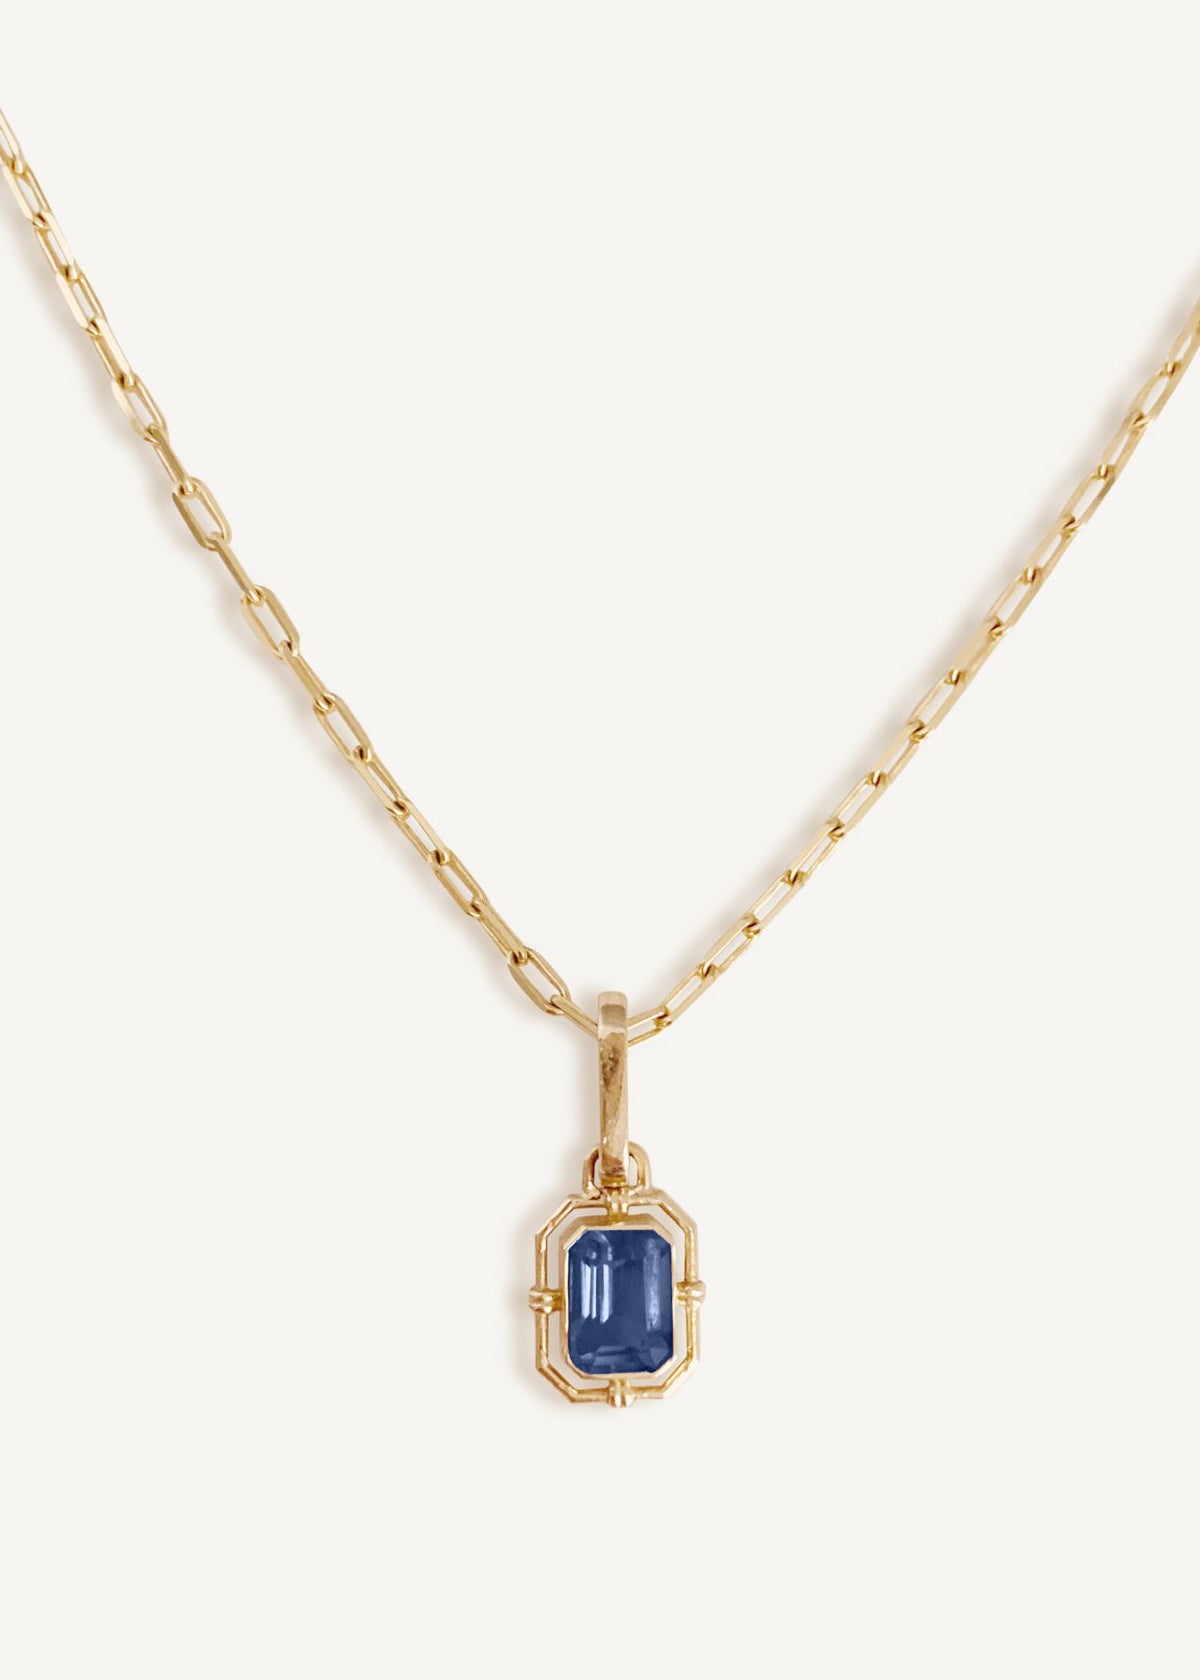 alt="Products Lyra Baguette Pendant I - Blue Sapphire with pico link chain"